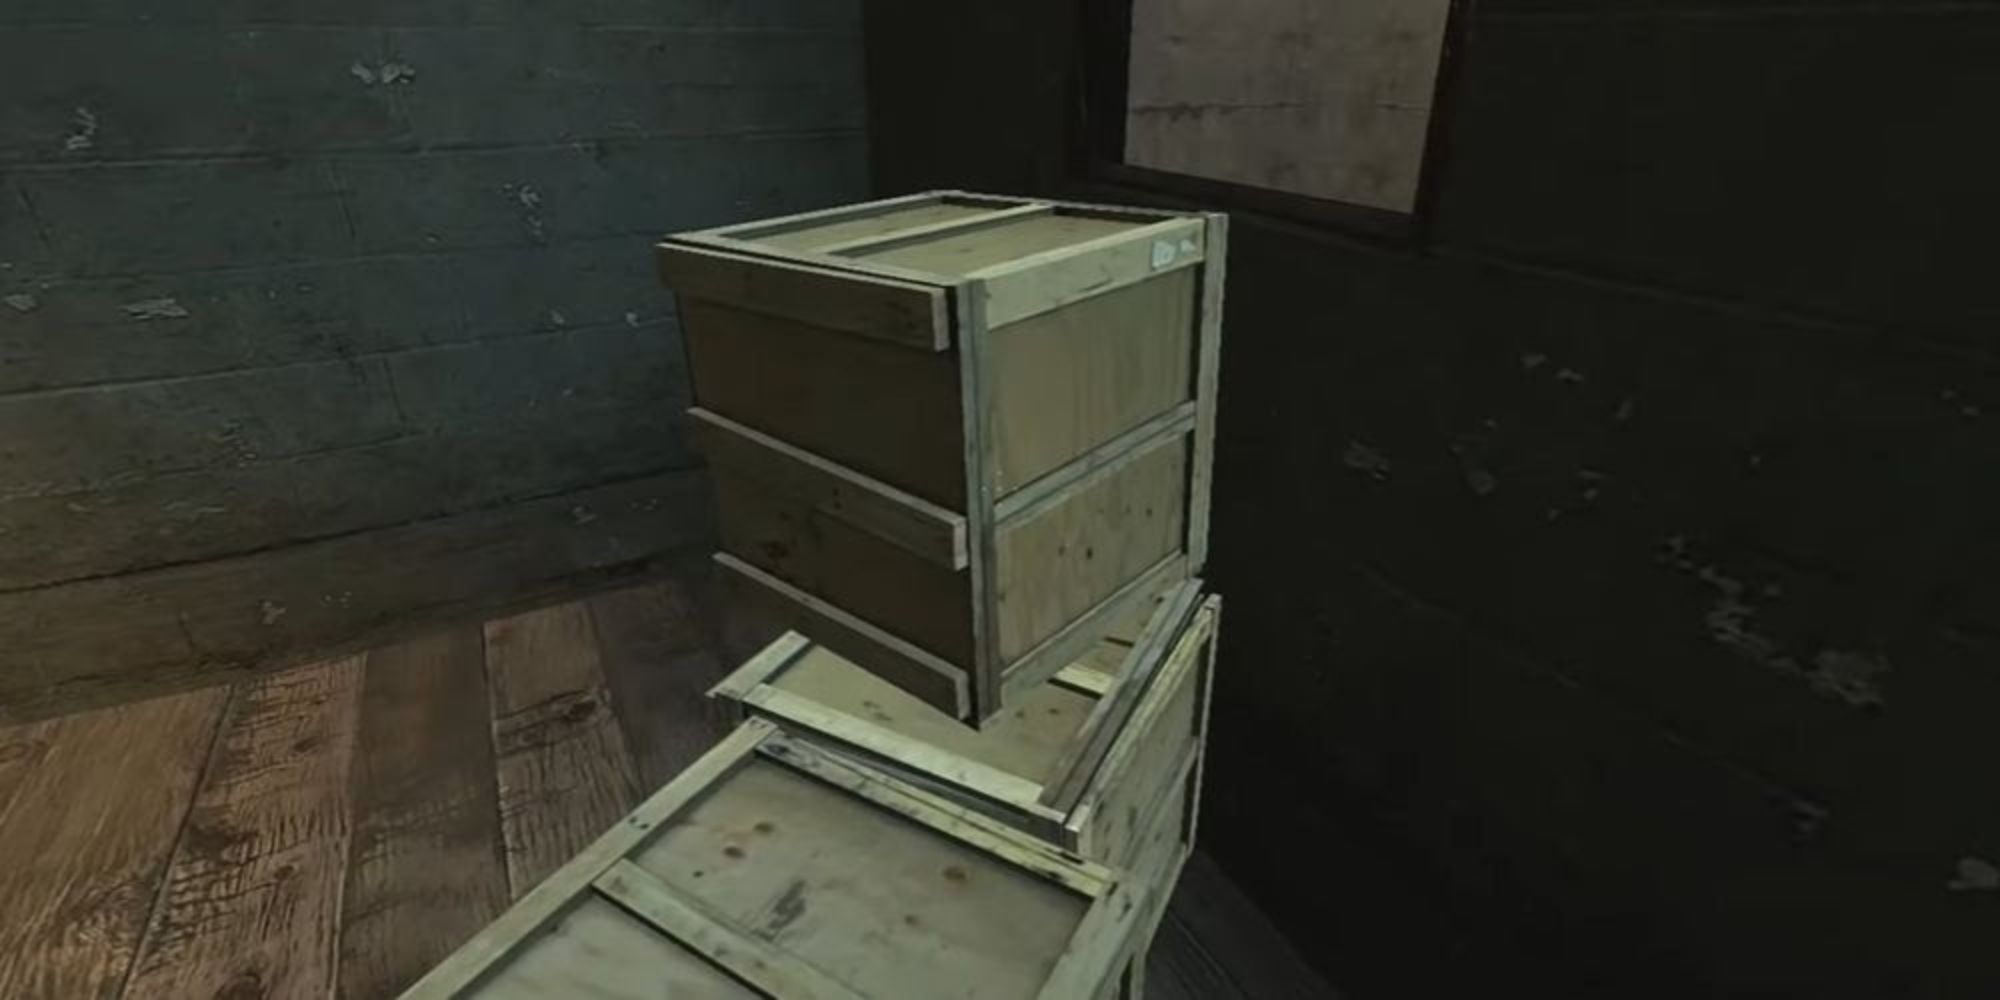 Half Life 2, crate stacking to reach a window